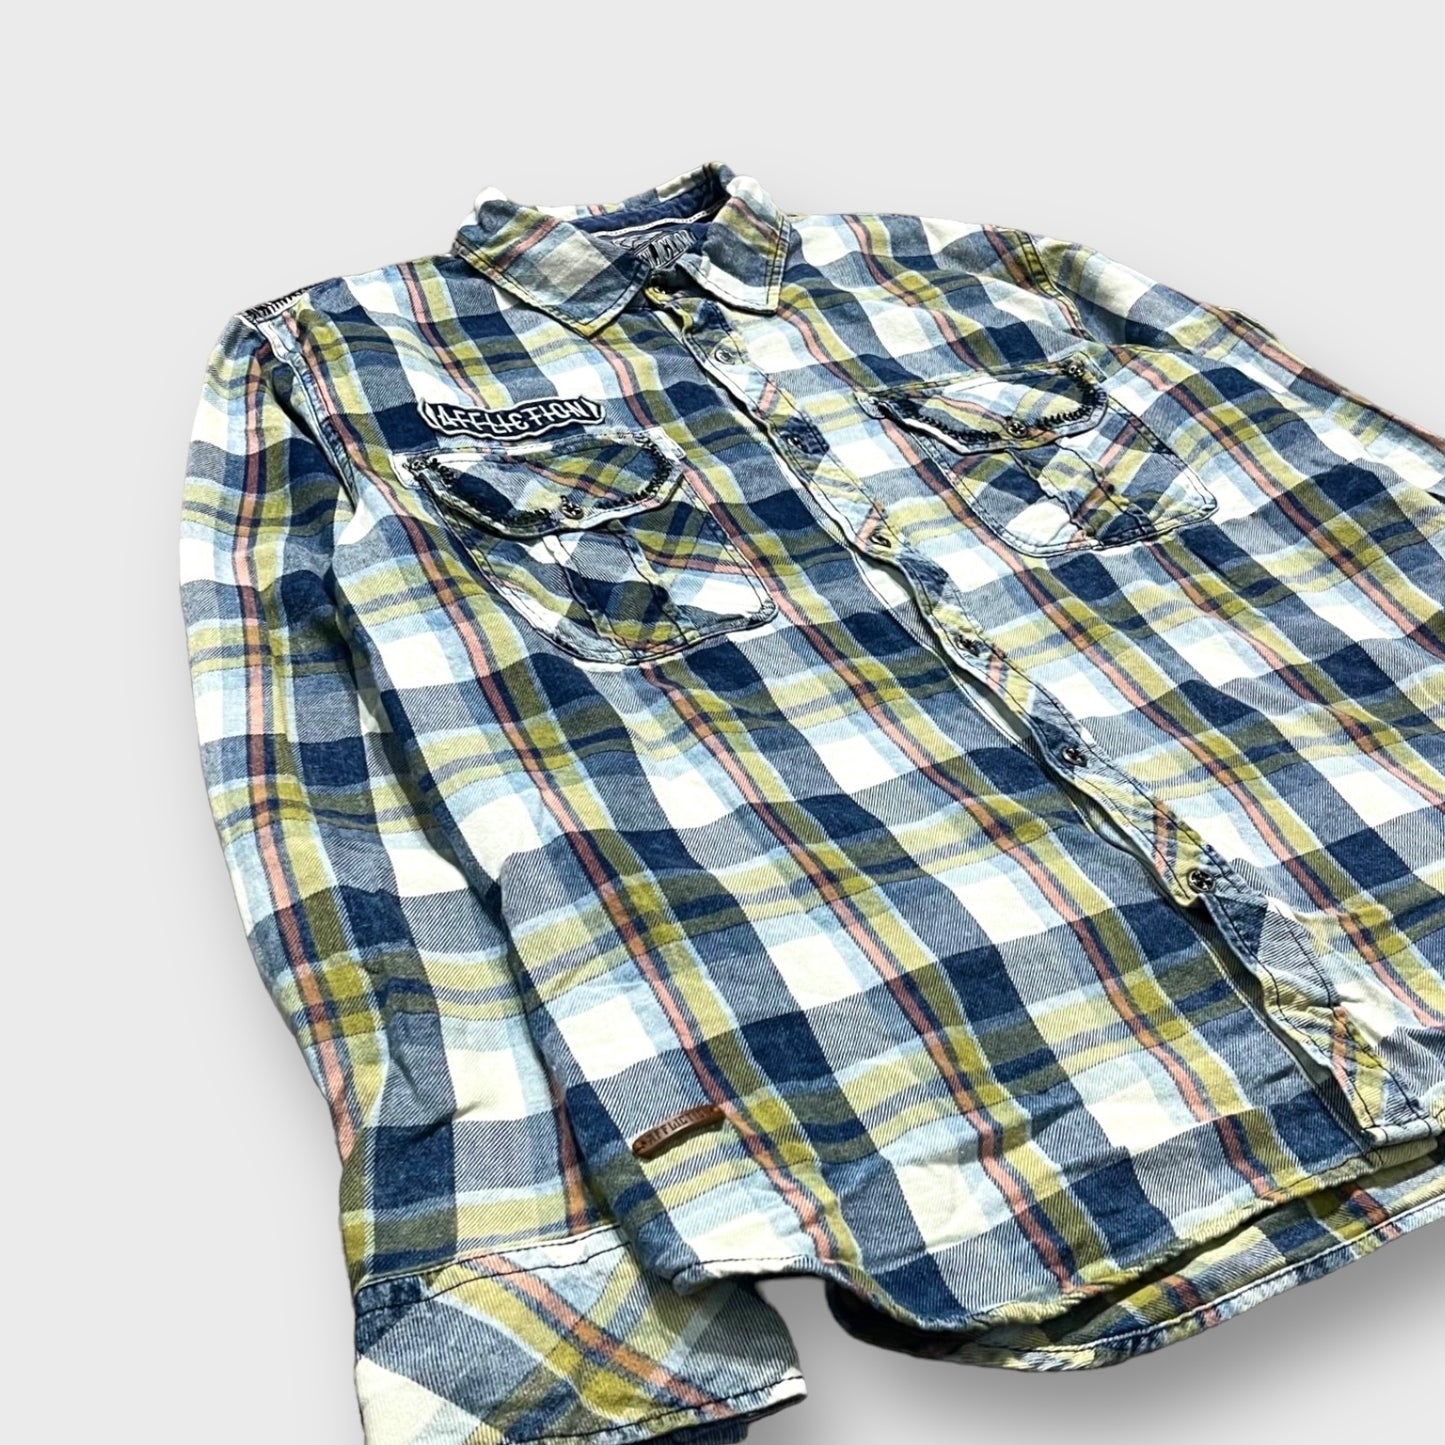 "AFFLICTION" Embroidery plaid pattern shirt